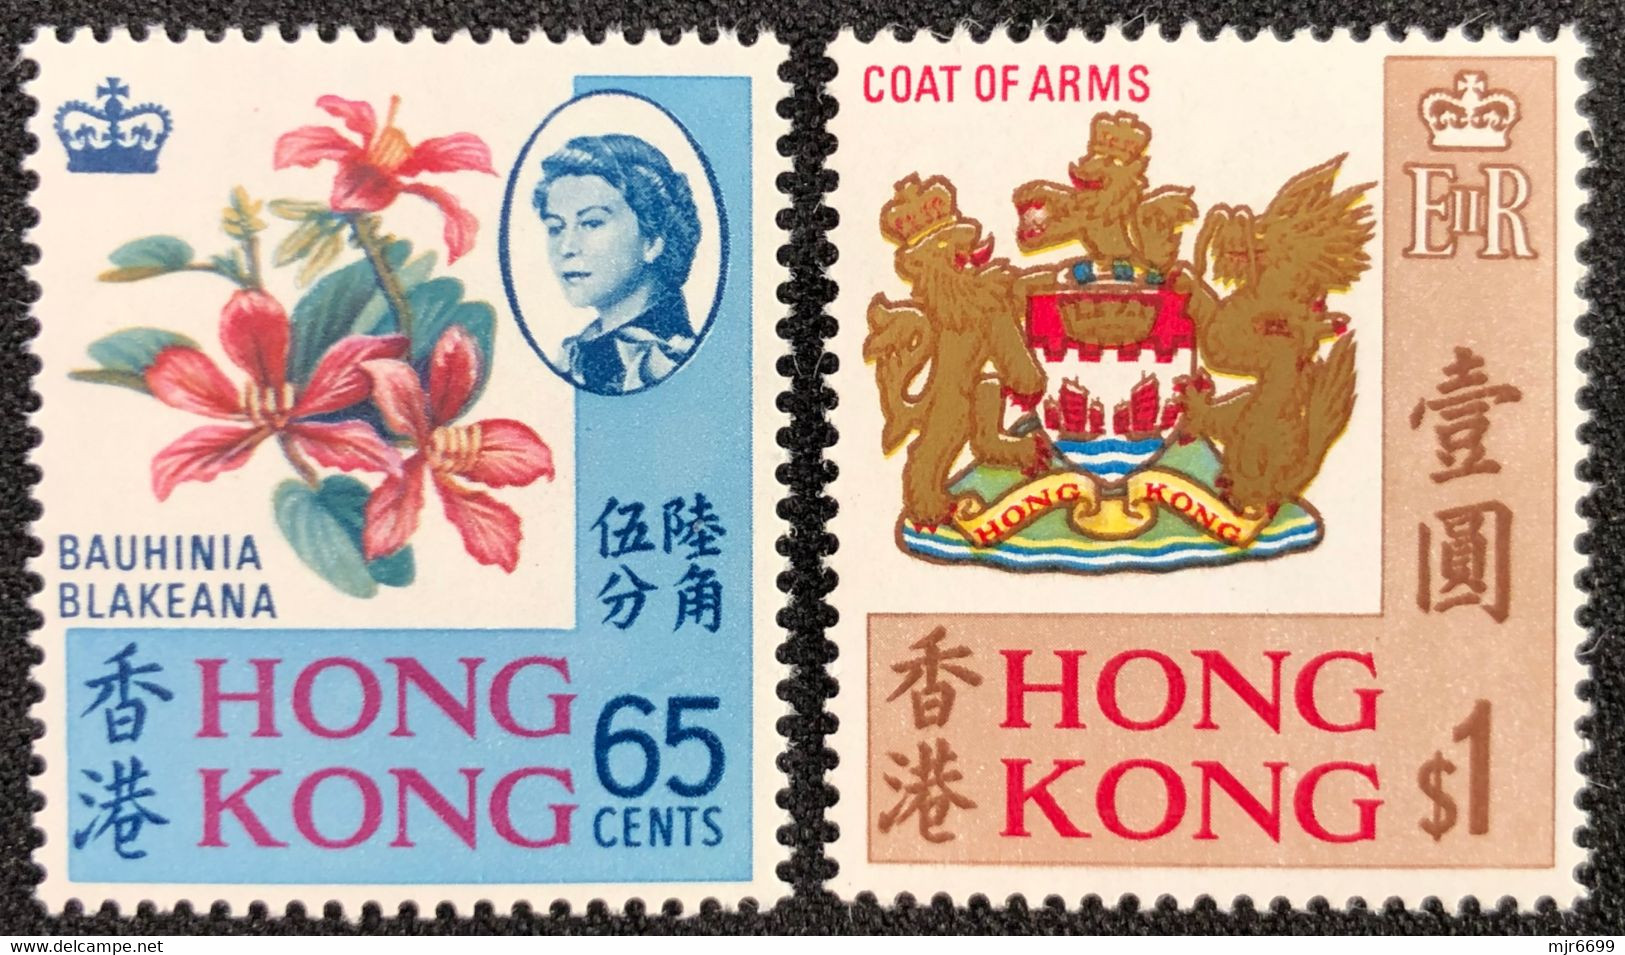 HONG KONG 1968 SET UM\MINT, NOT CHECKED FOR WATERMARK AND GUM - Unused Stamps